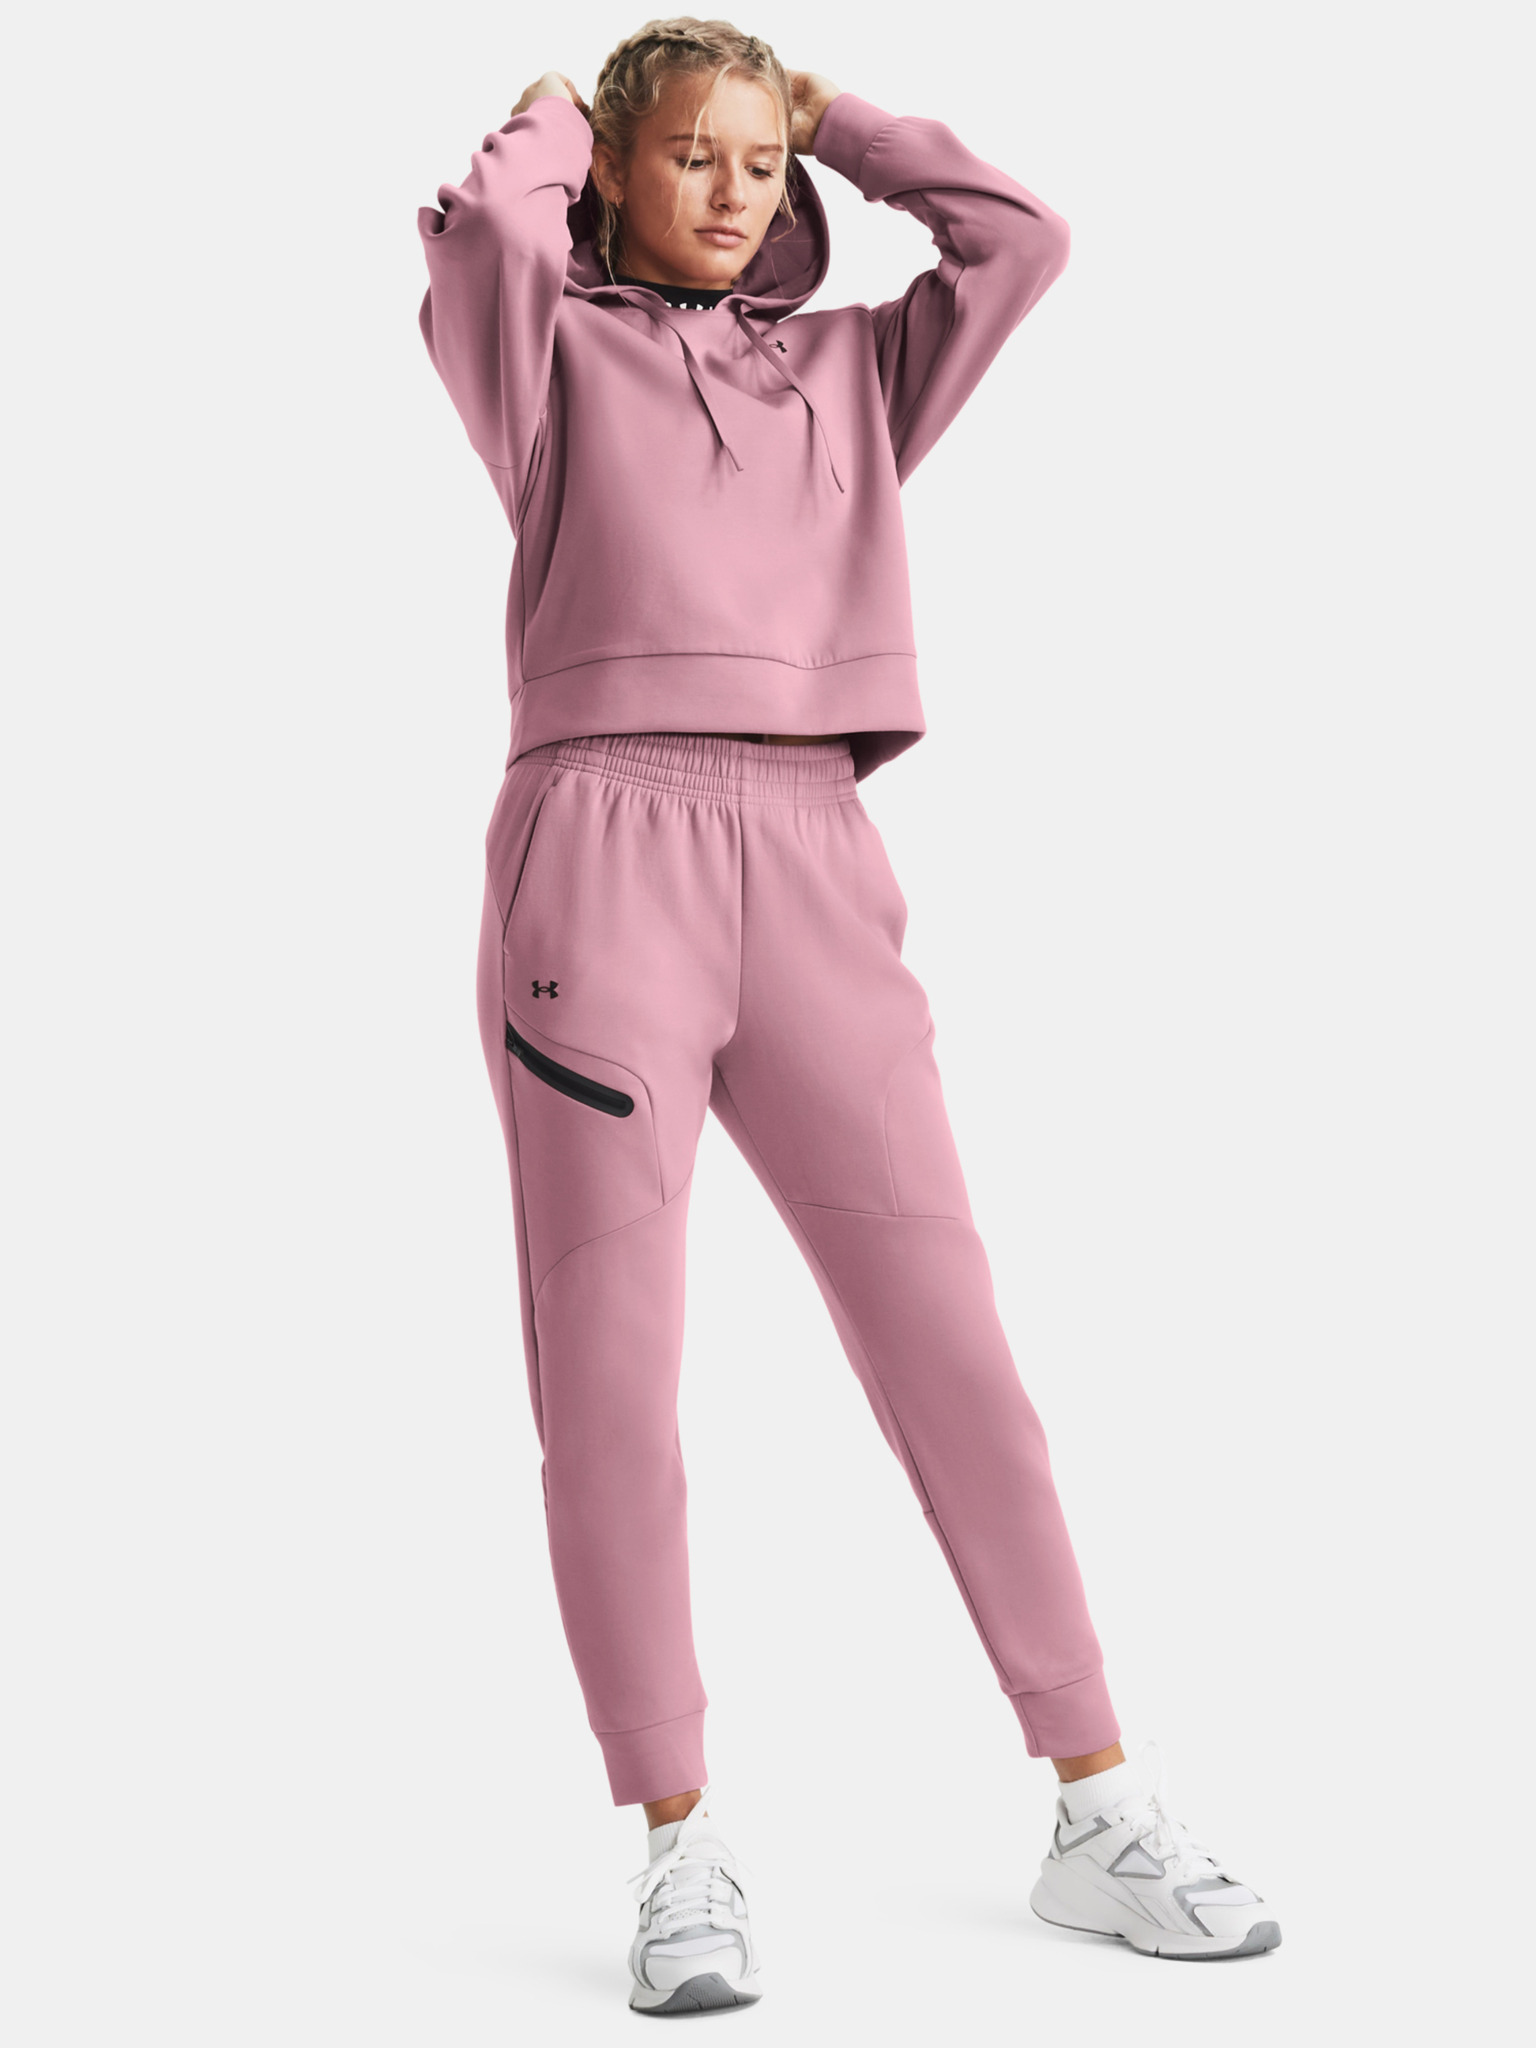 Women's Under Armour Unstoppable Joggers